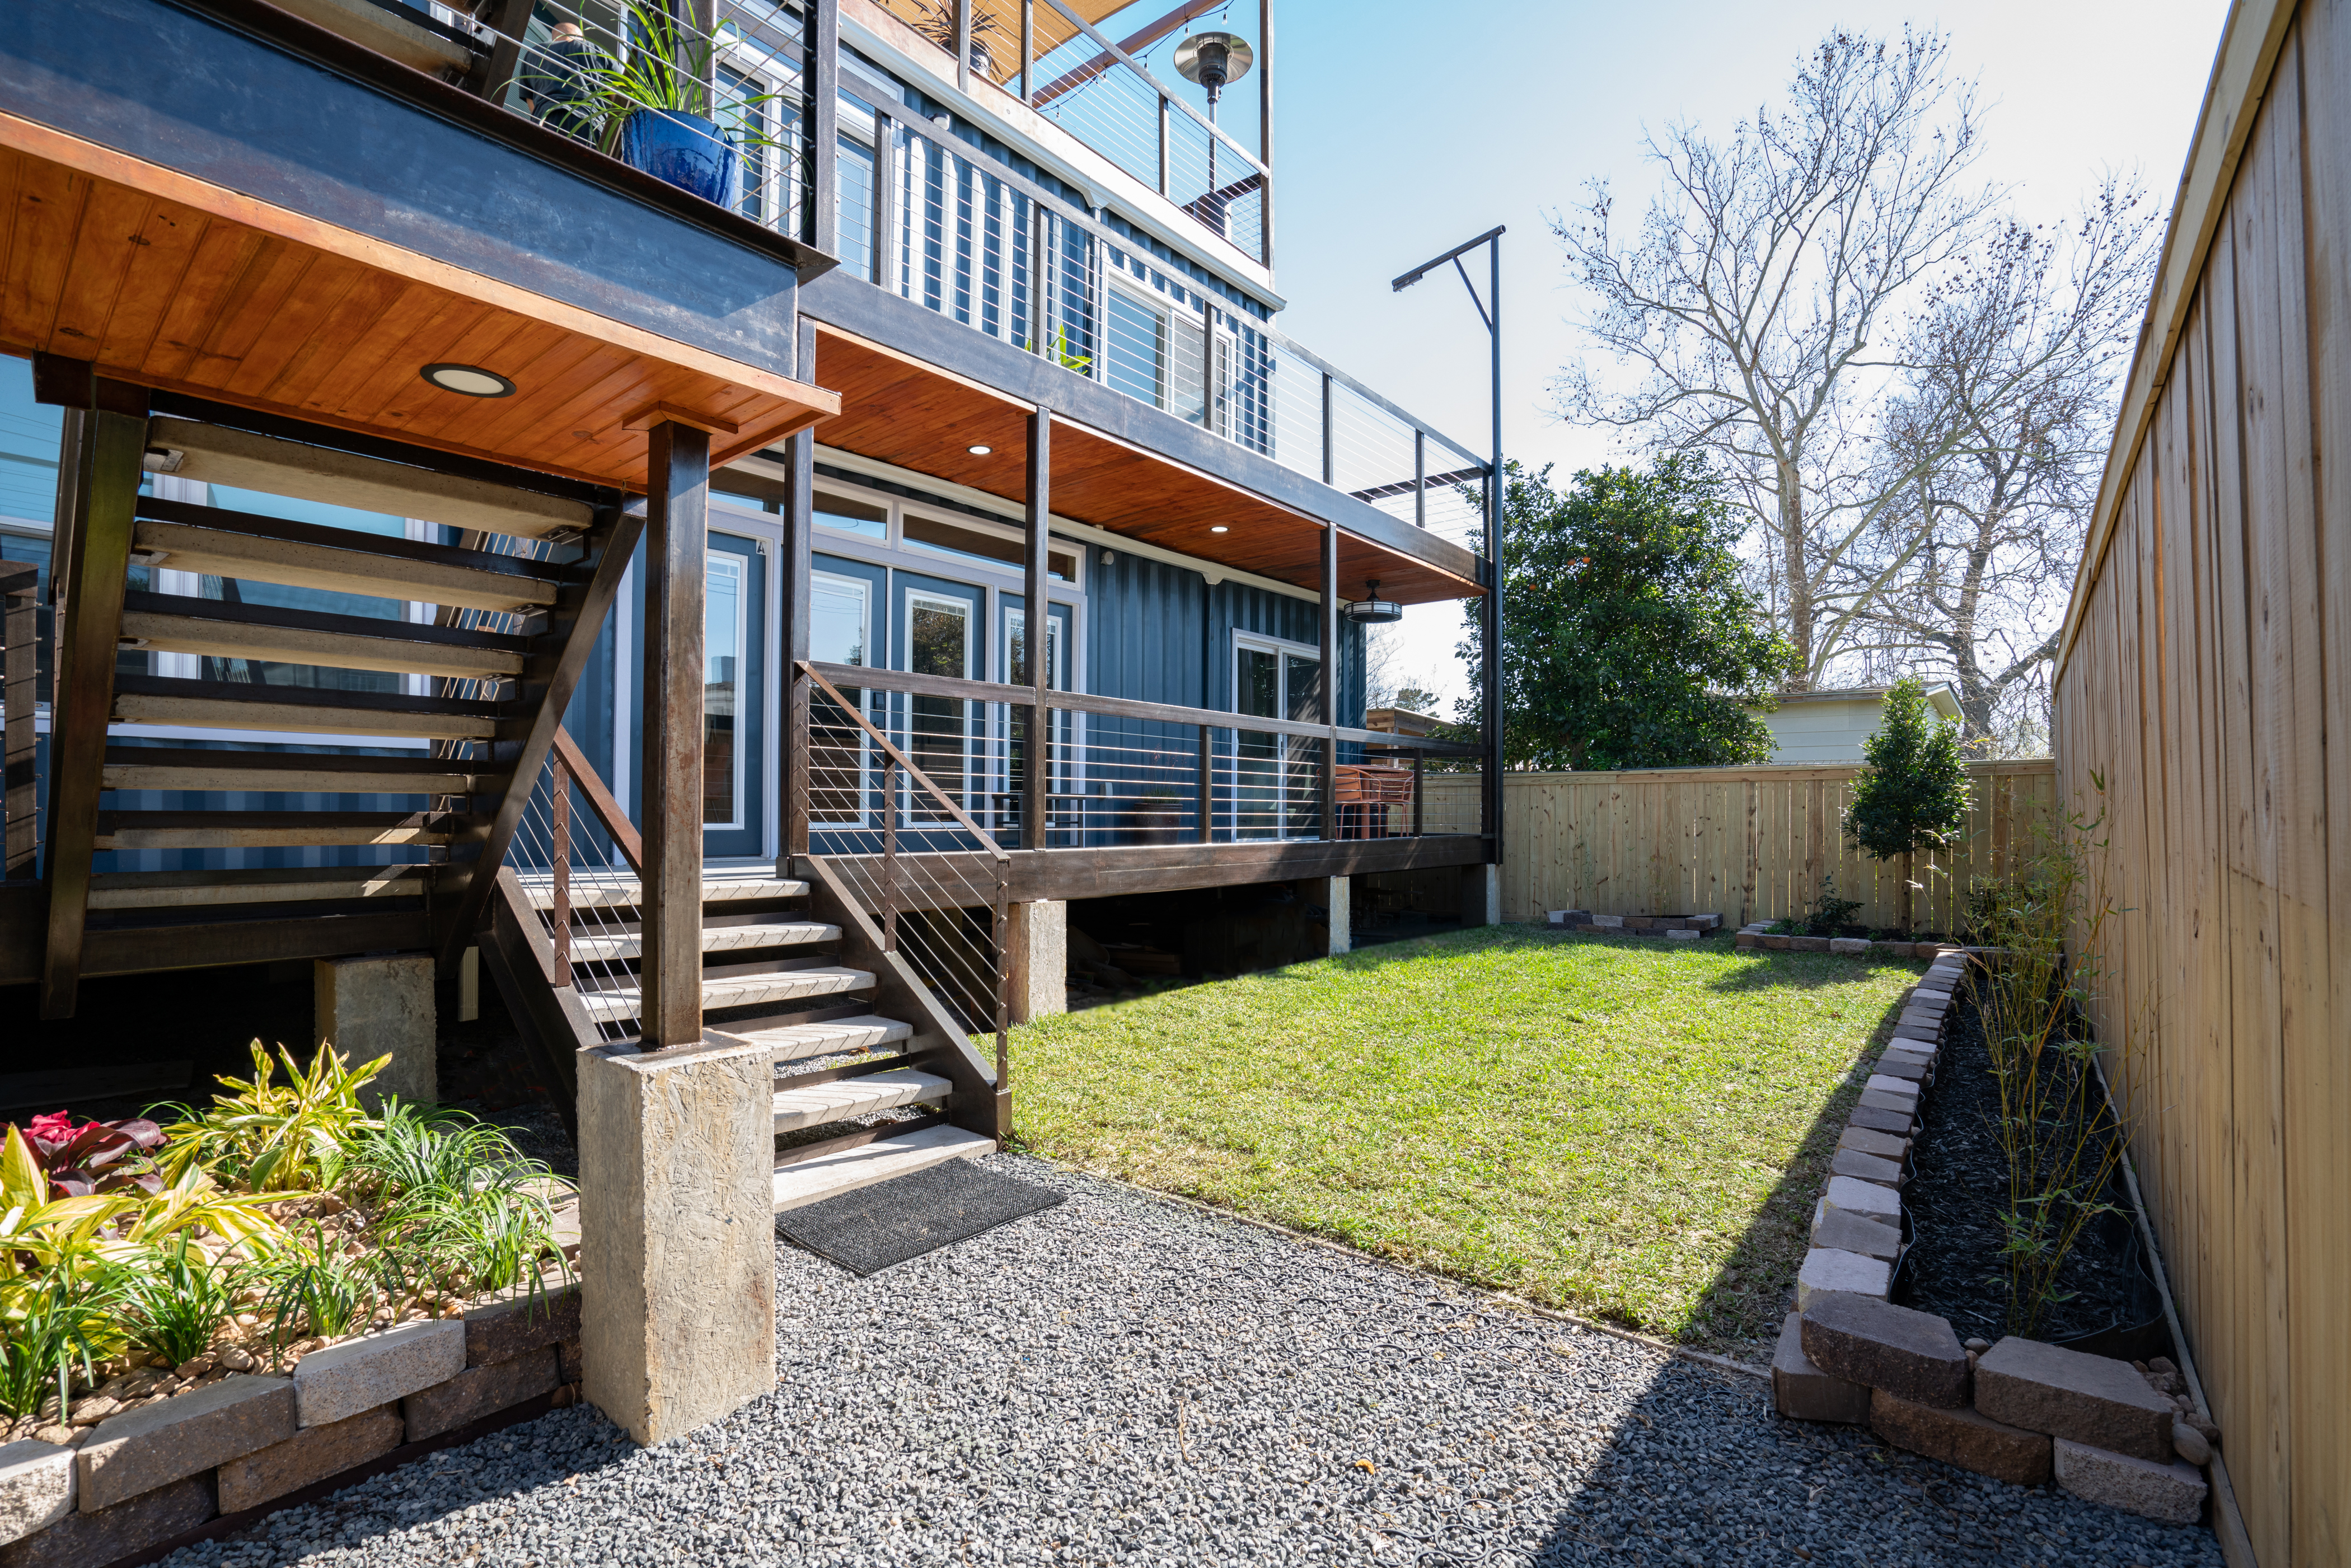 This Multi-level Container House Is the Coolest Airbnb in Houston